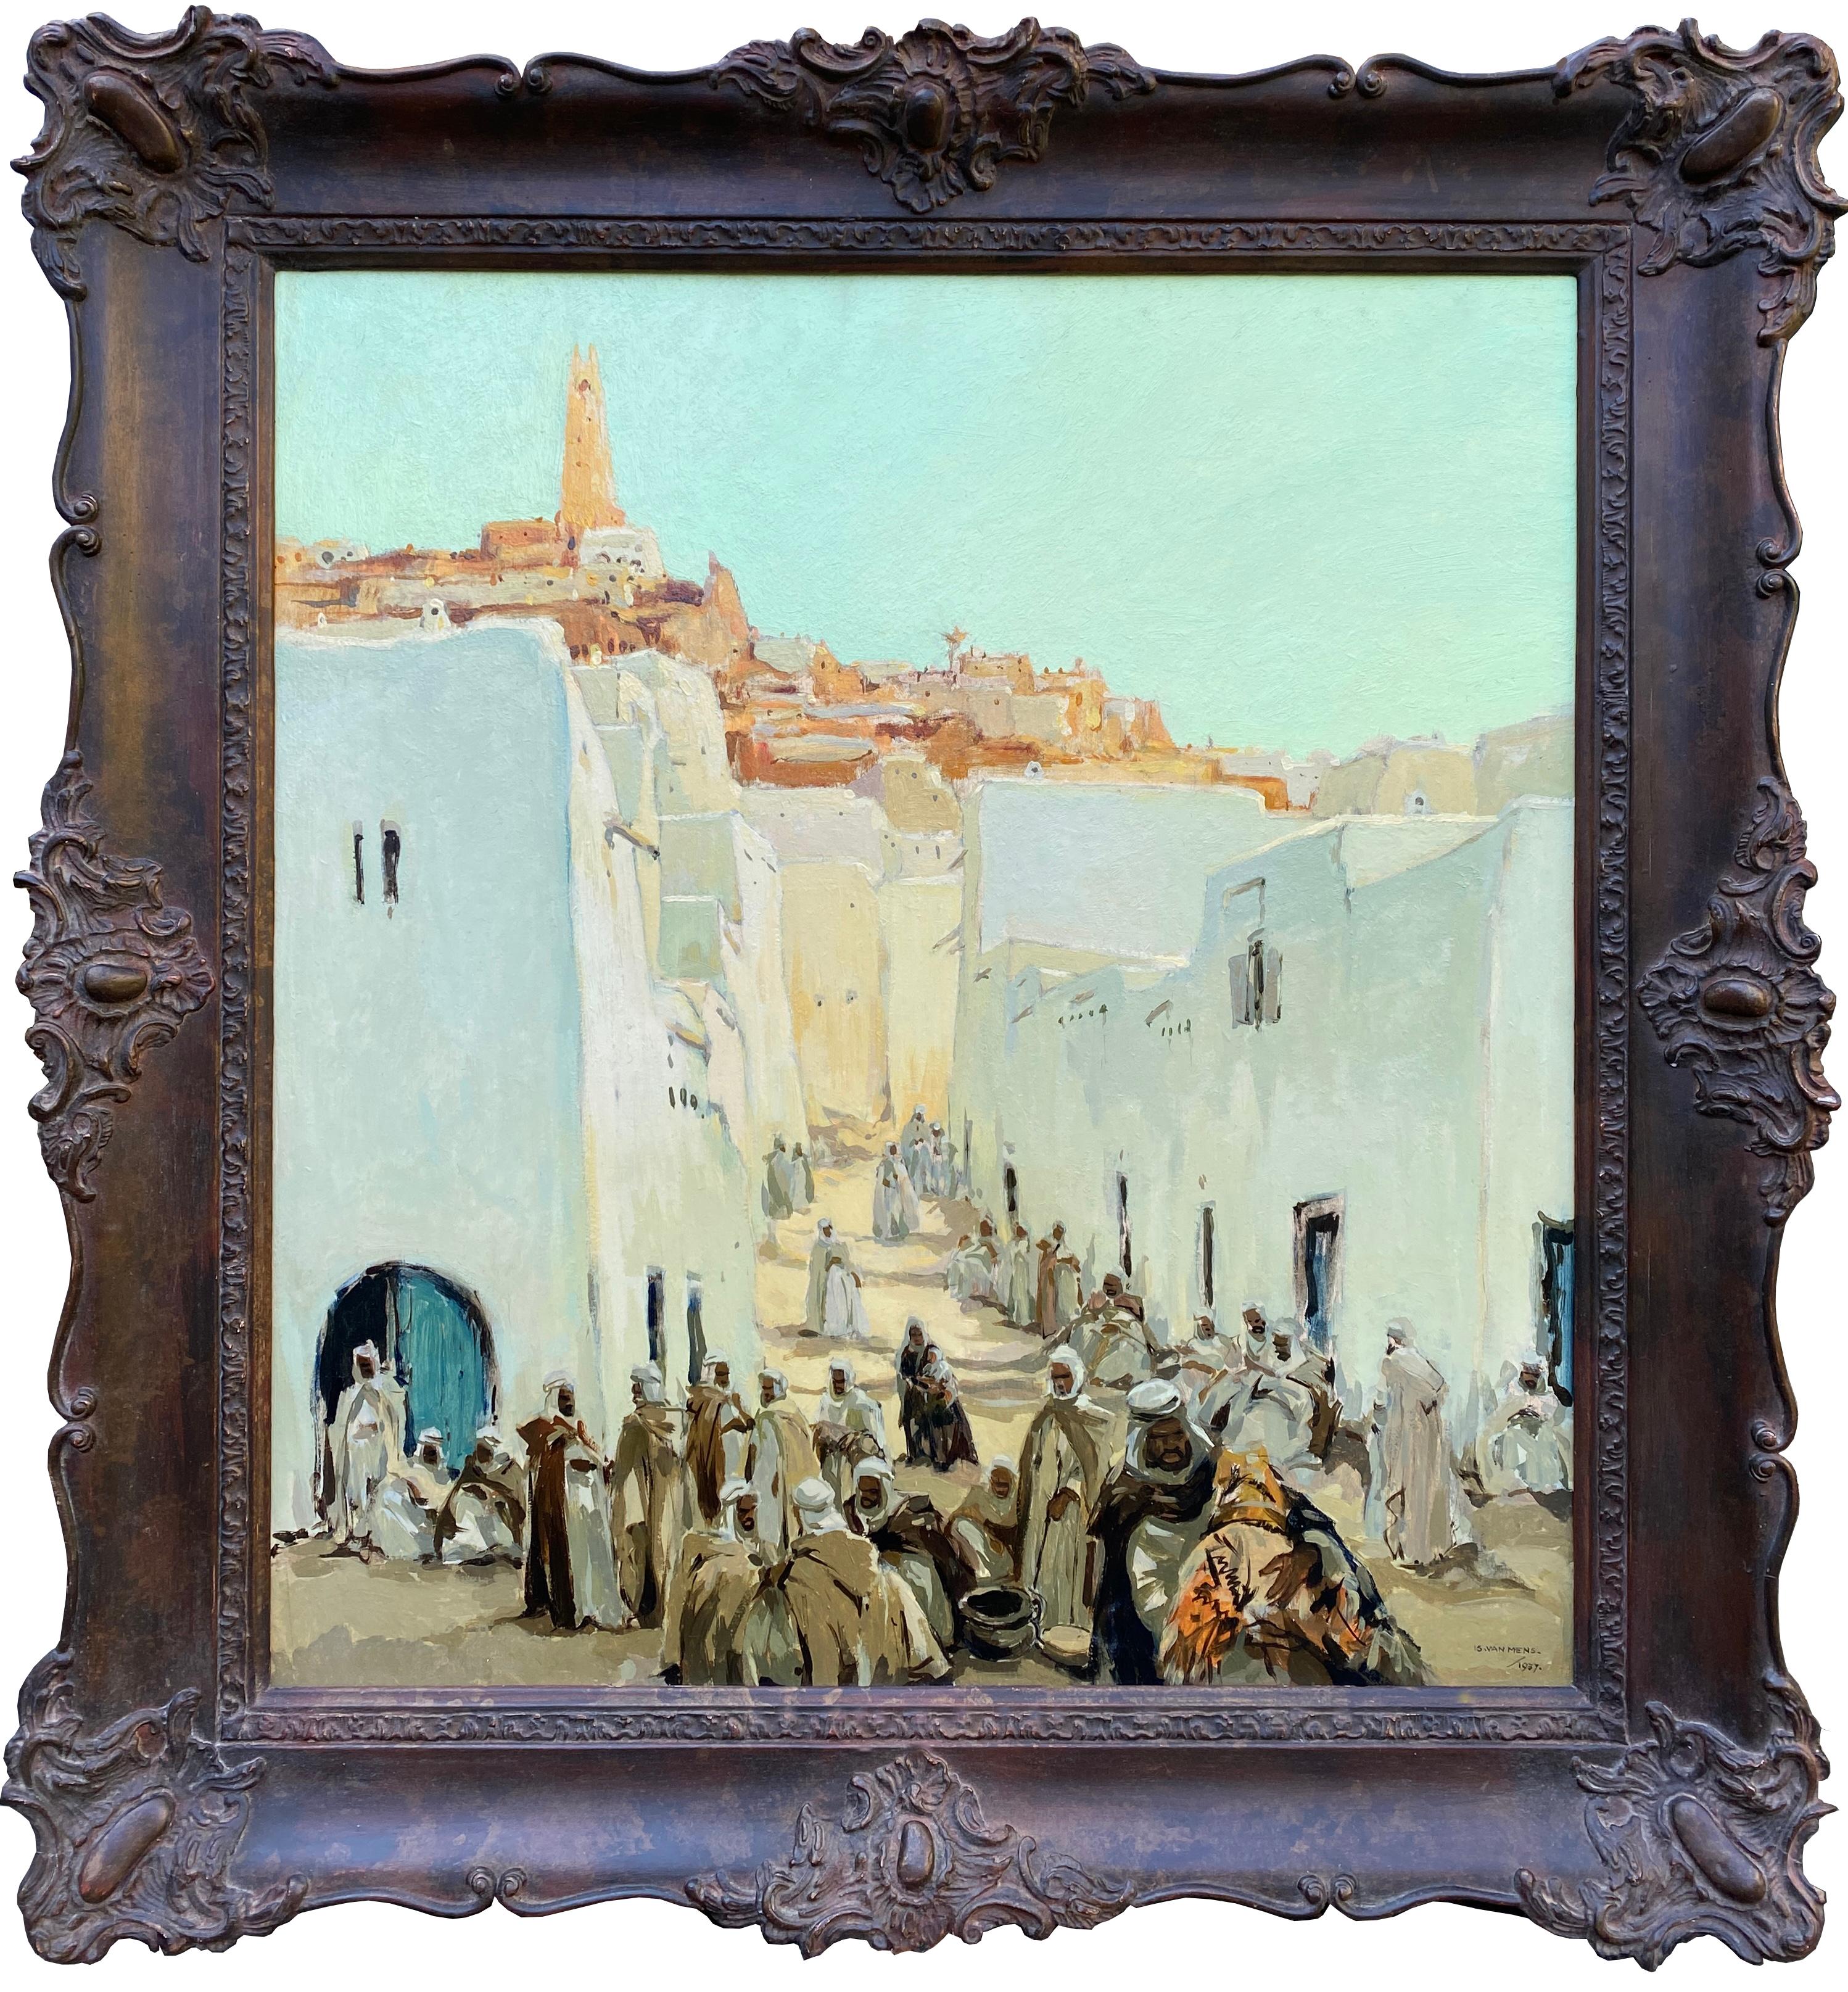 Isidorus Van Mens
Berlicum 1890 – 1985 Oosterhout
Dutch Painter

'Ghardaia – The Capital of M’Zab, Algeria'
Signature: Signed bottom right and dated 1957, placed and signed on reverse
Medium: Oil on board
Dimensions: Image size 65 x 60 cm, frame